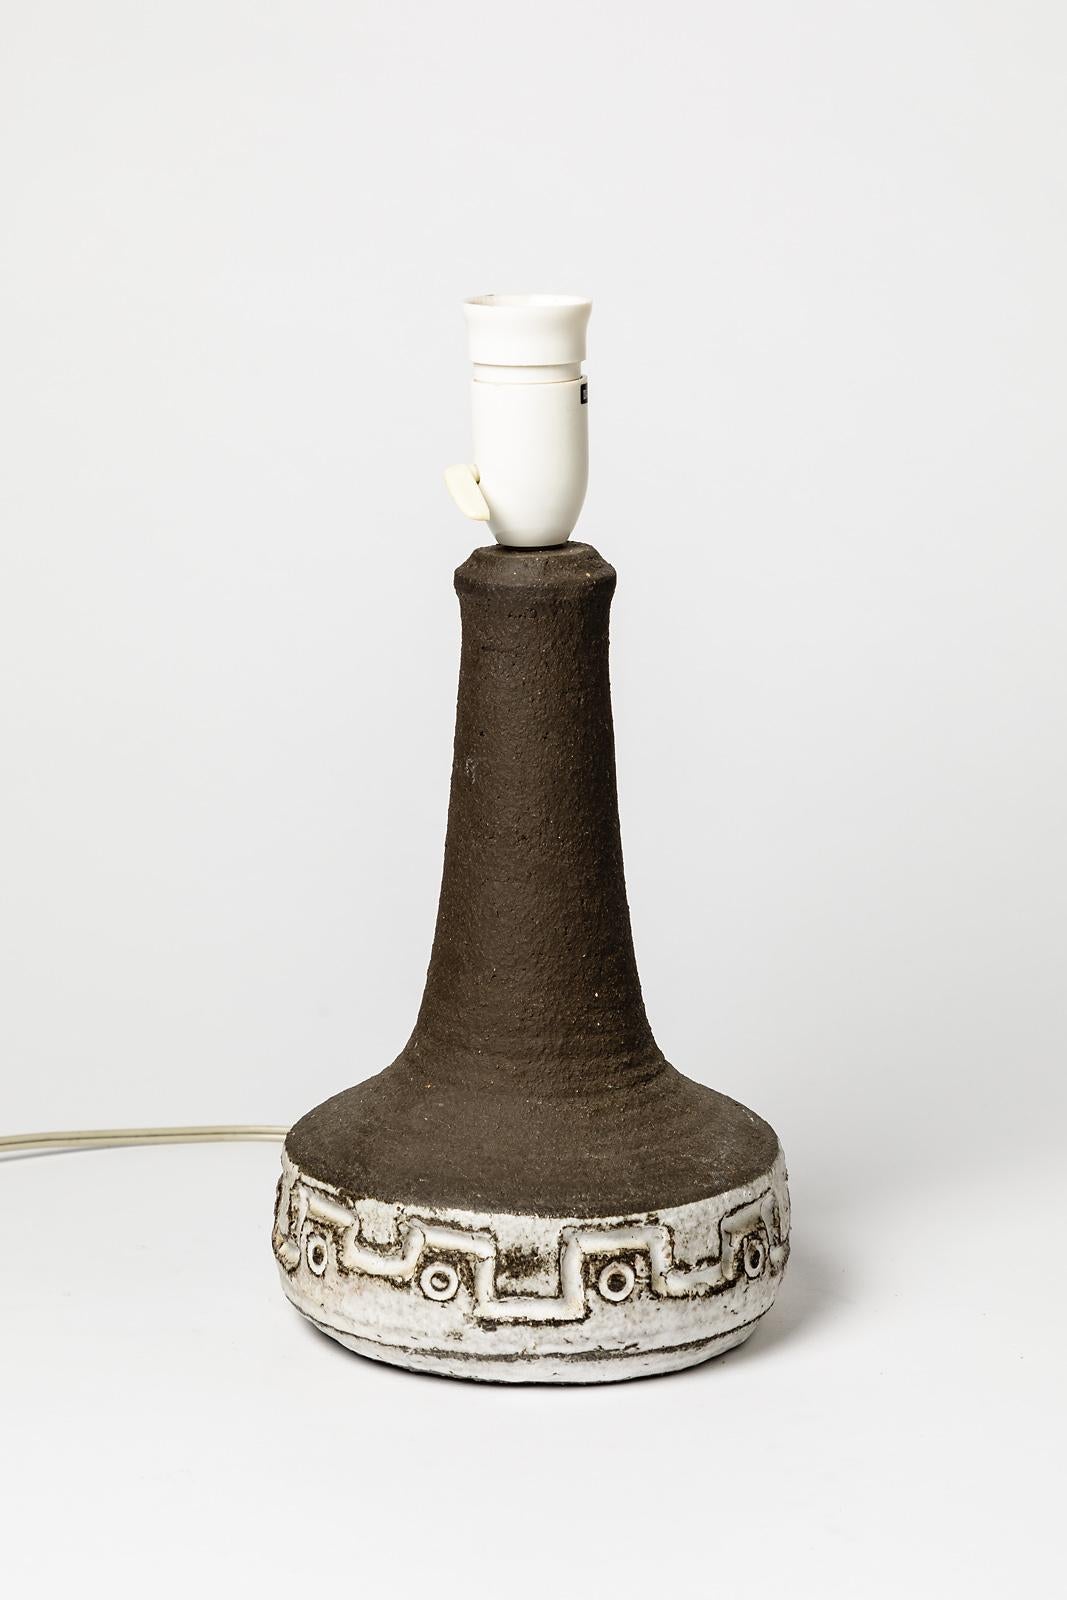 Black and White Stoneware Ceramic Table Lamp circa 1970 French Design In Excellent Condition For Sale In Neuilly-en- sancerre, FR